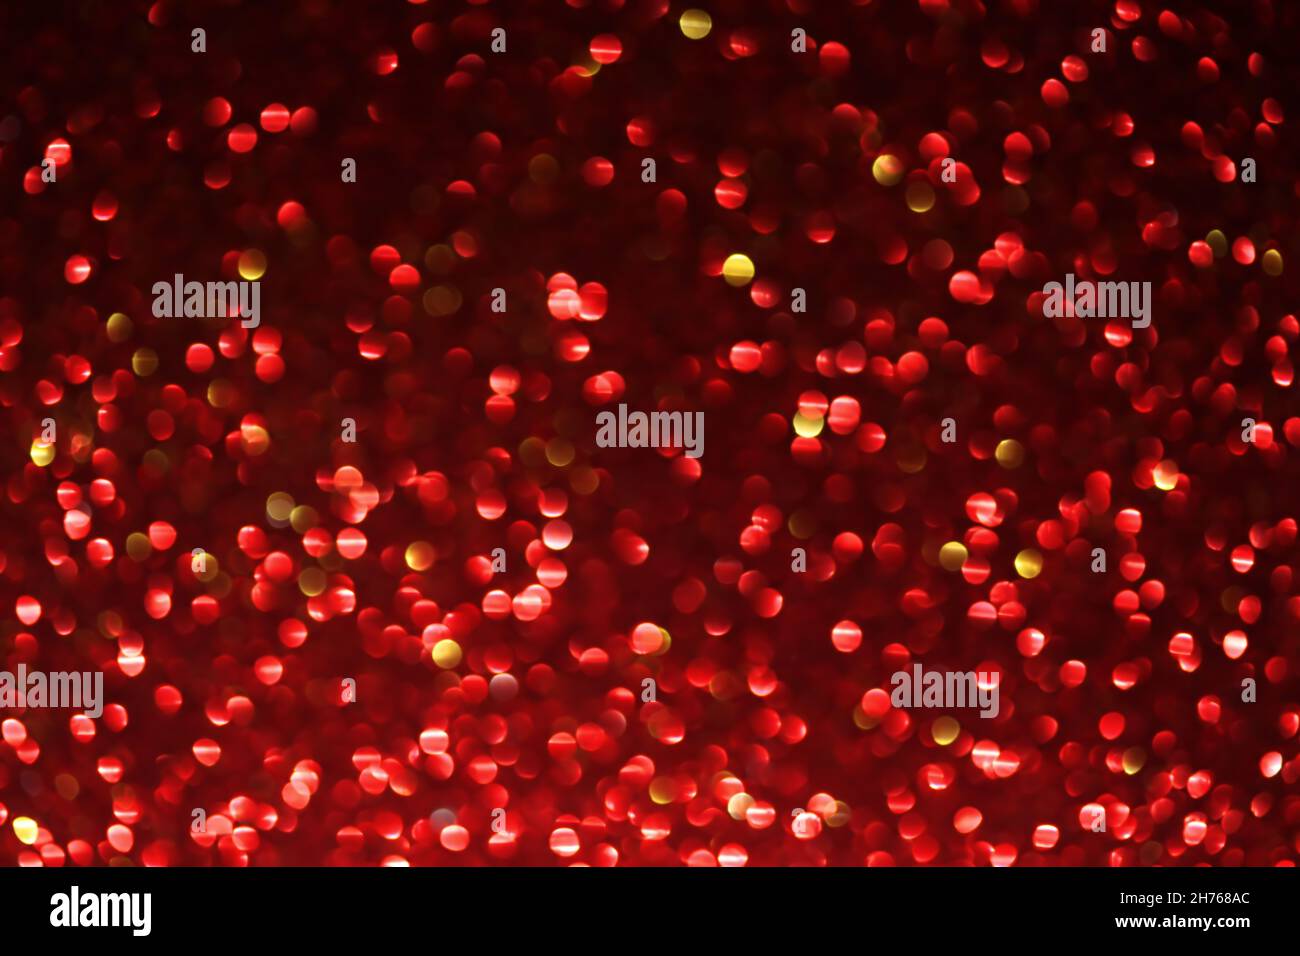 Abstract lights background Stock Photo